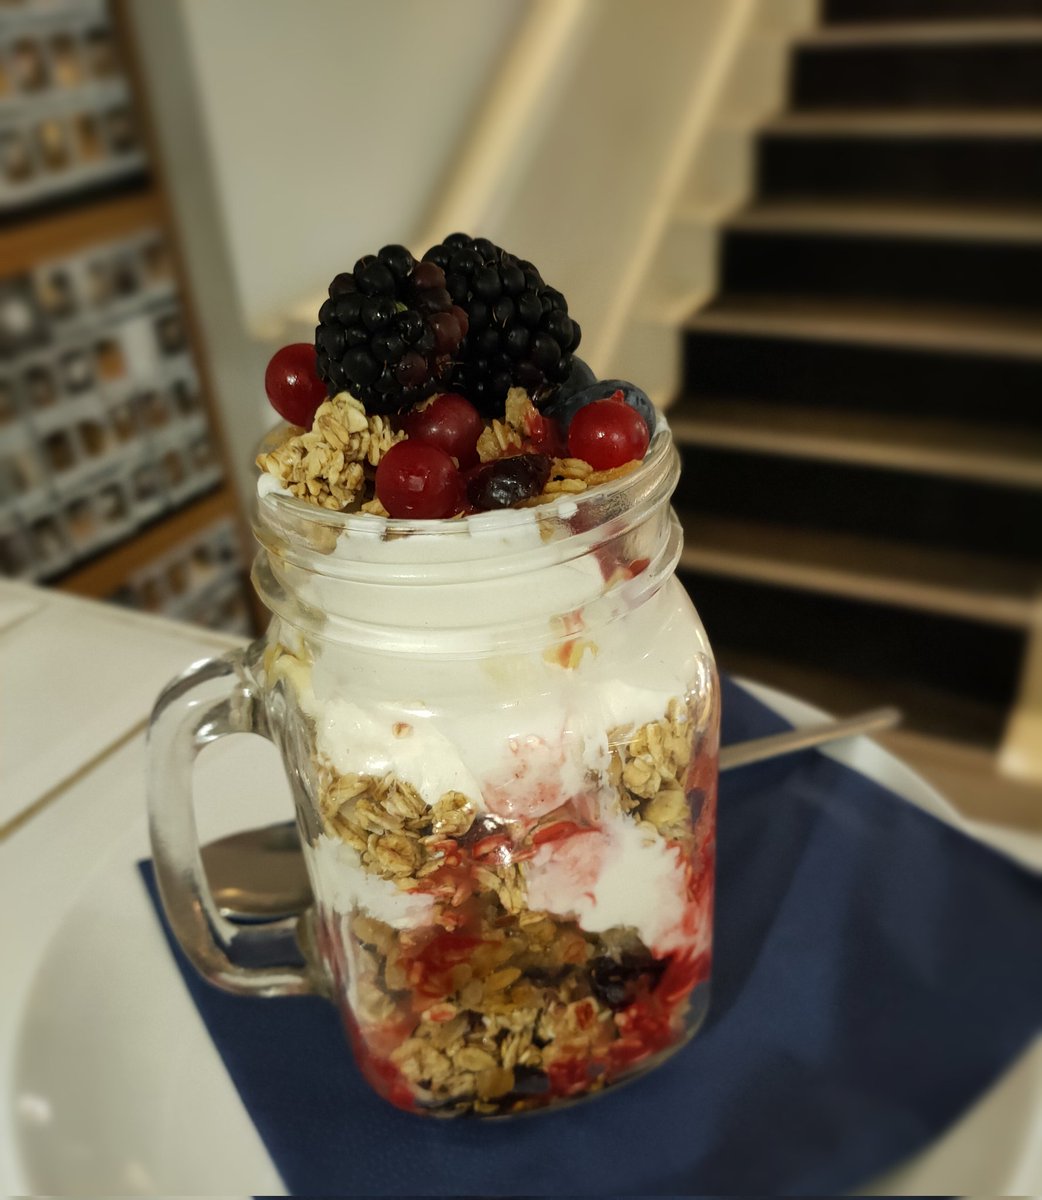 Our Joiner's Granola Pot! Layers of crunchy granola, Greek yoghurt (soya yoghurt available), maple syrup, fruit coulis & fresh seasonal berries! 😋🫐🍒🍇🍓 #granola #thejoinersshop #coffeeshop #freshberries #greekyogurt #localbusiness #discoverhambleton